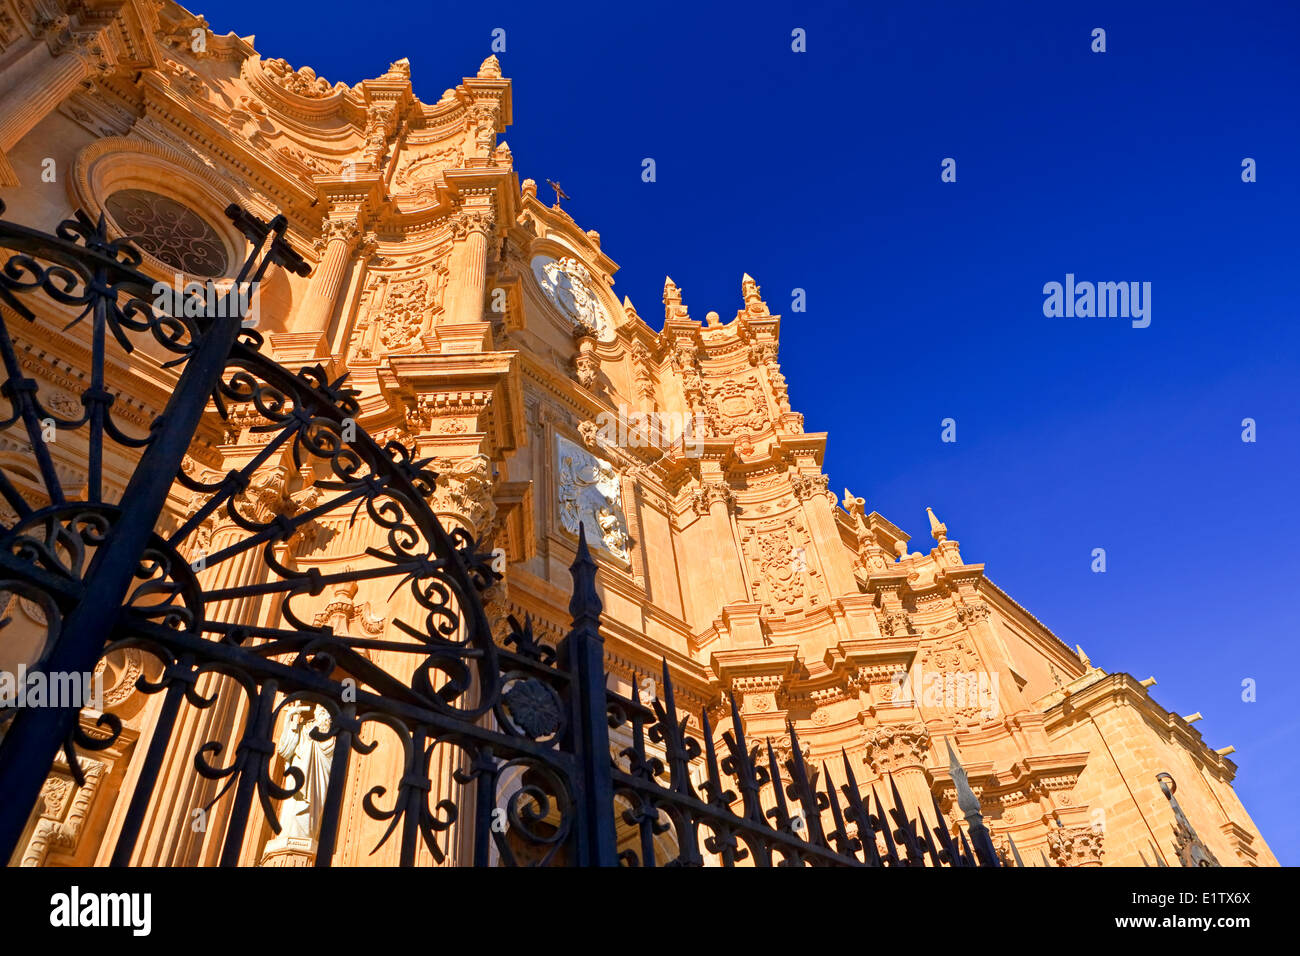 Facade of the Cathedral of Guadix in the town of Guadix, Province of Granada, Andalusia (Andalucia), Spain, Europe. Stock Photo